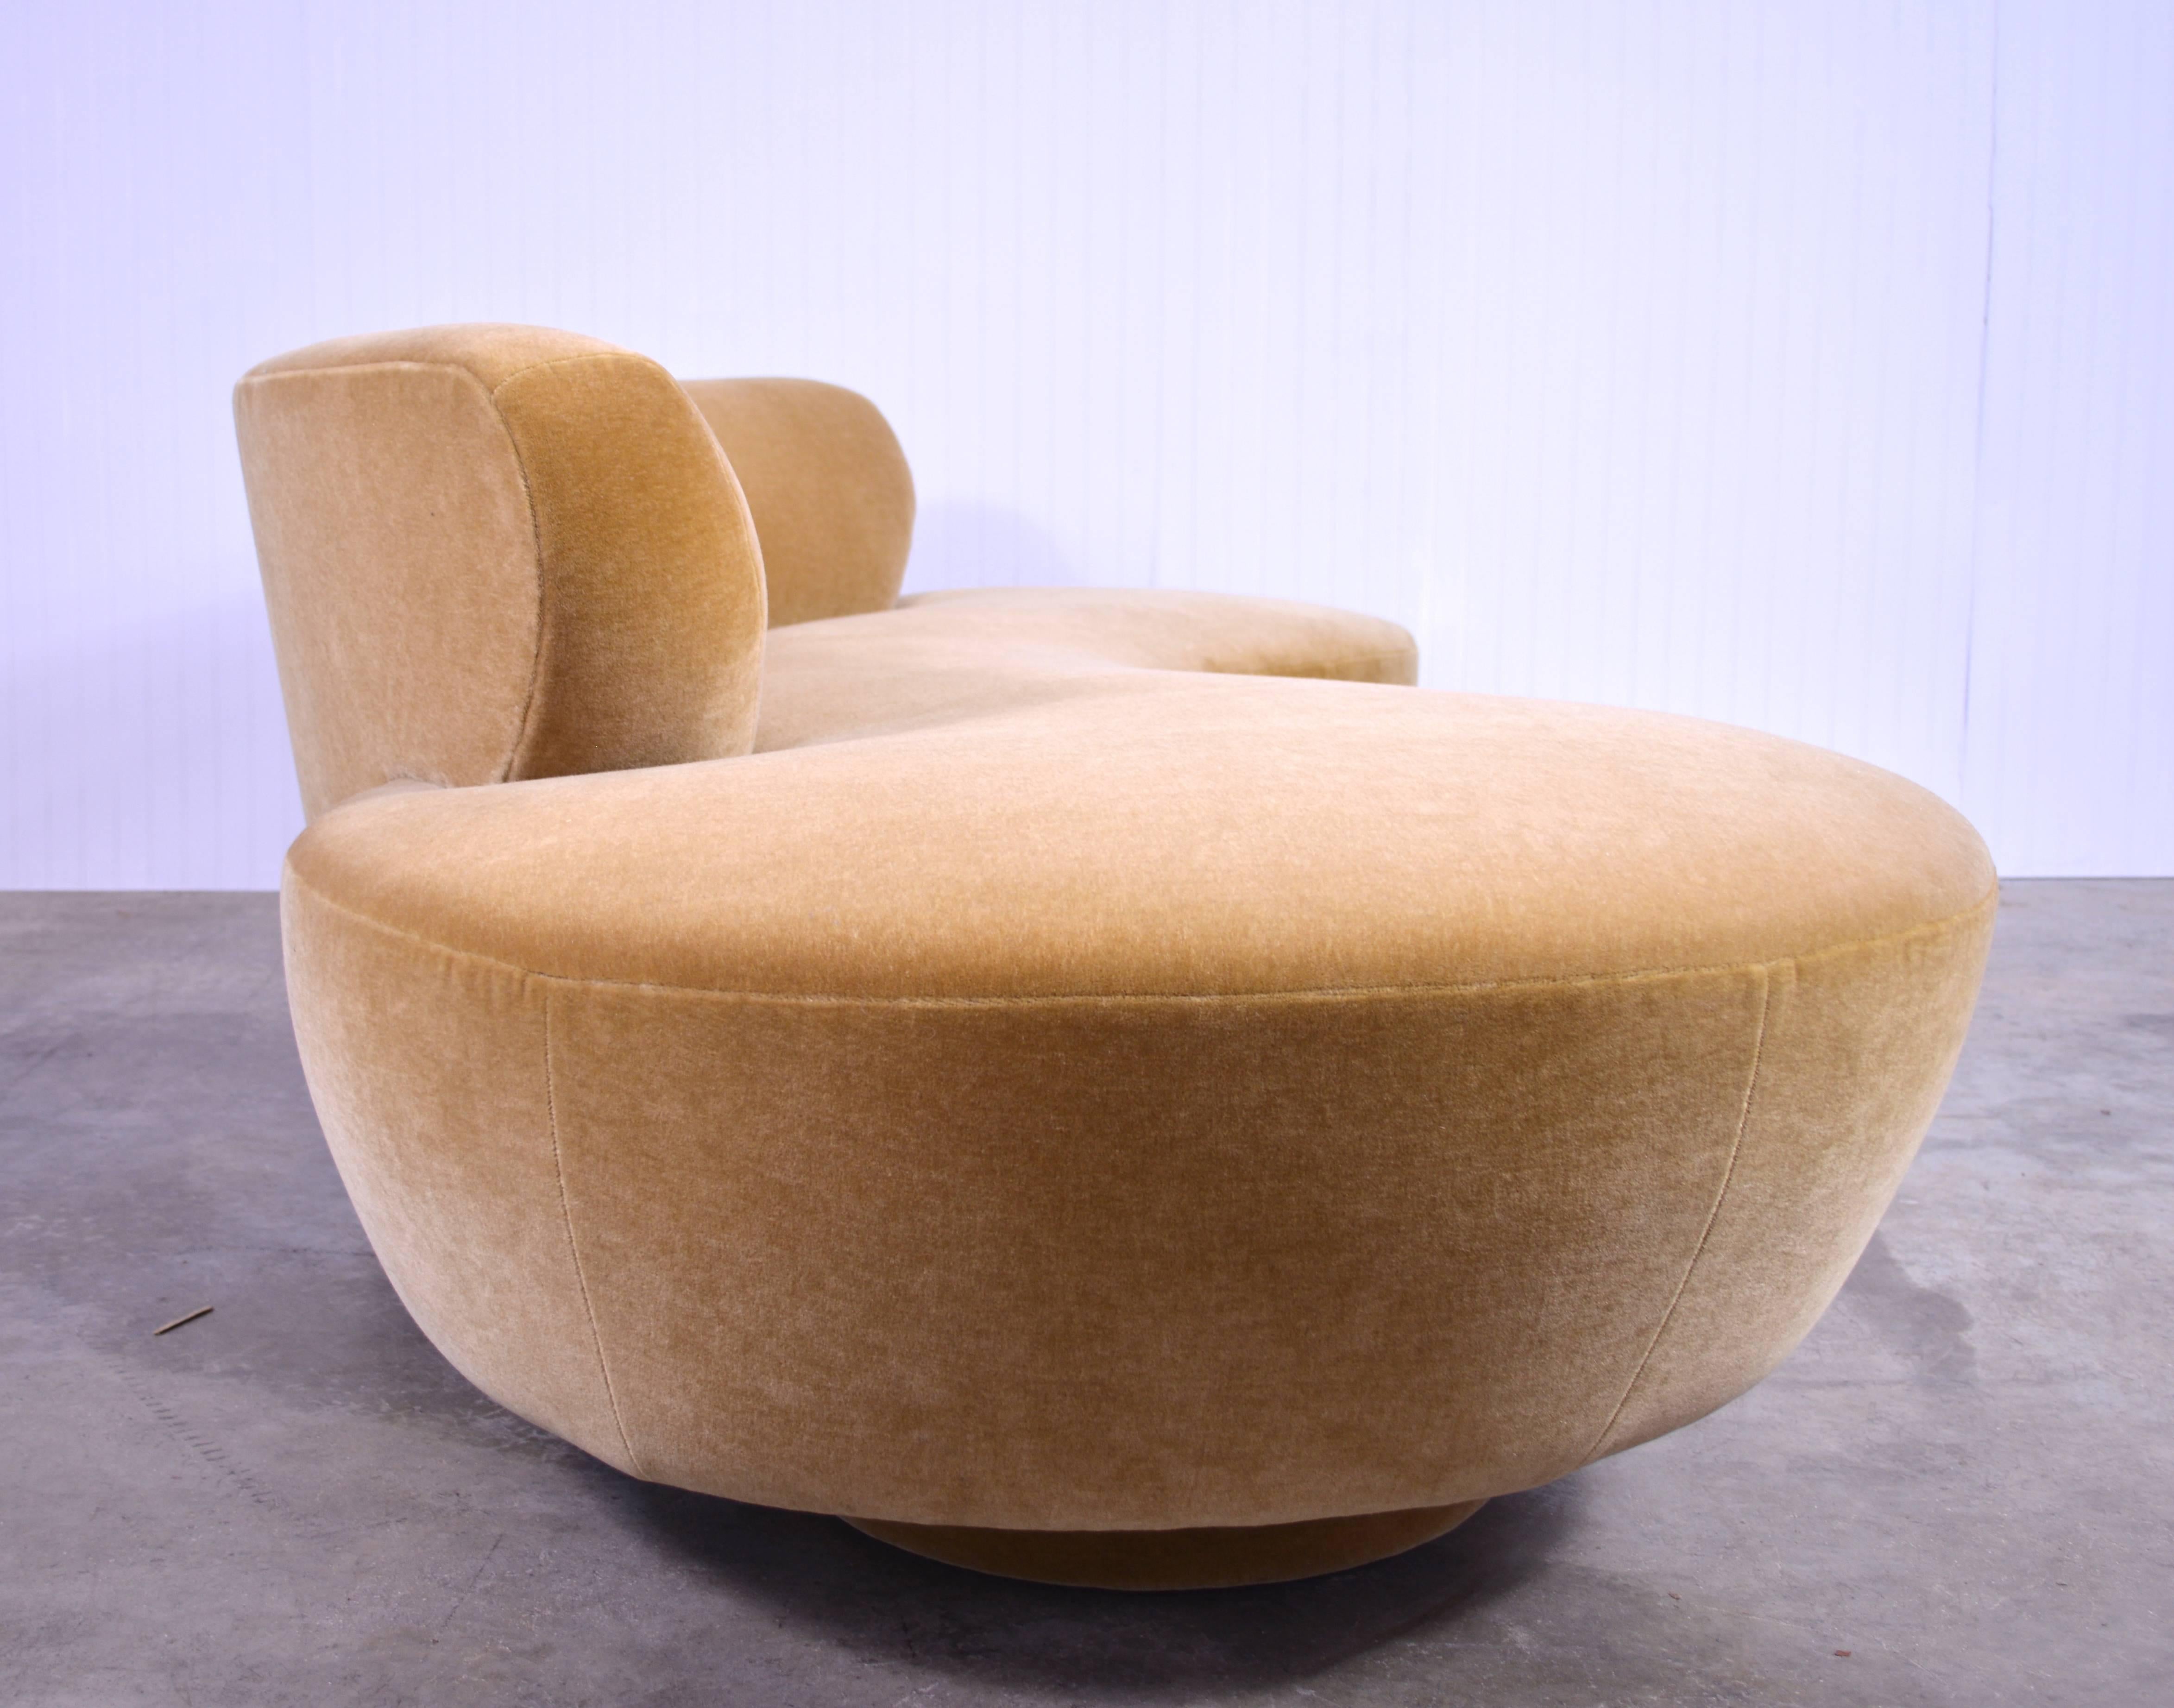 "Cloud" sofa designed by Vladimir Kagan for Directional. Newly upholstered in camel mohair. Acrylic base and Directional label present.